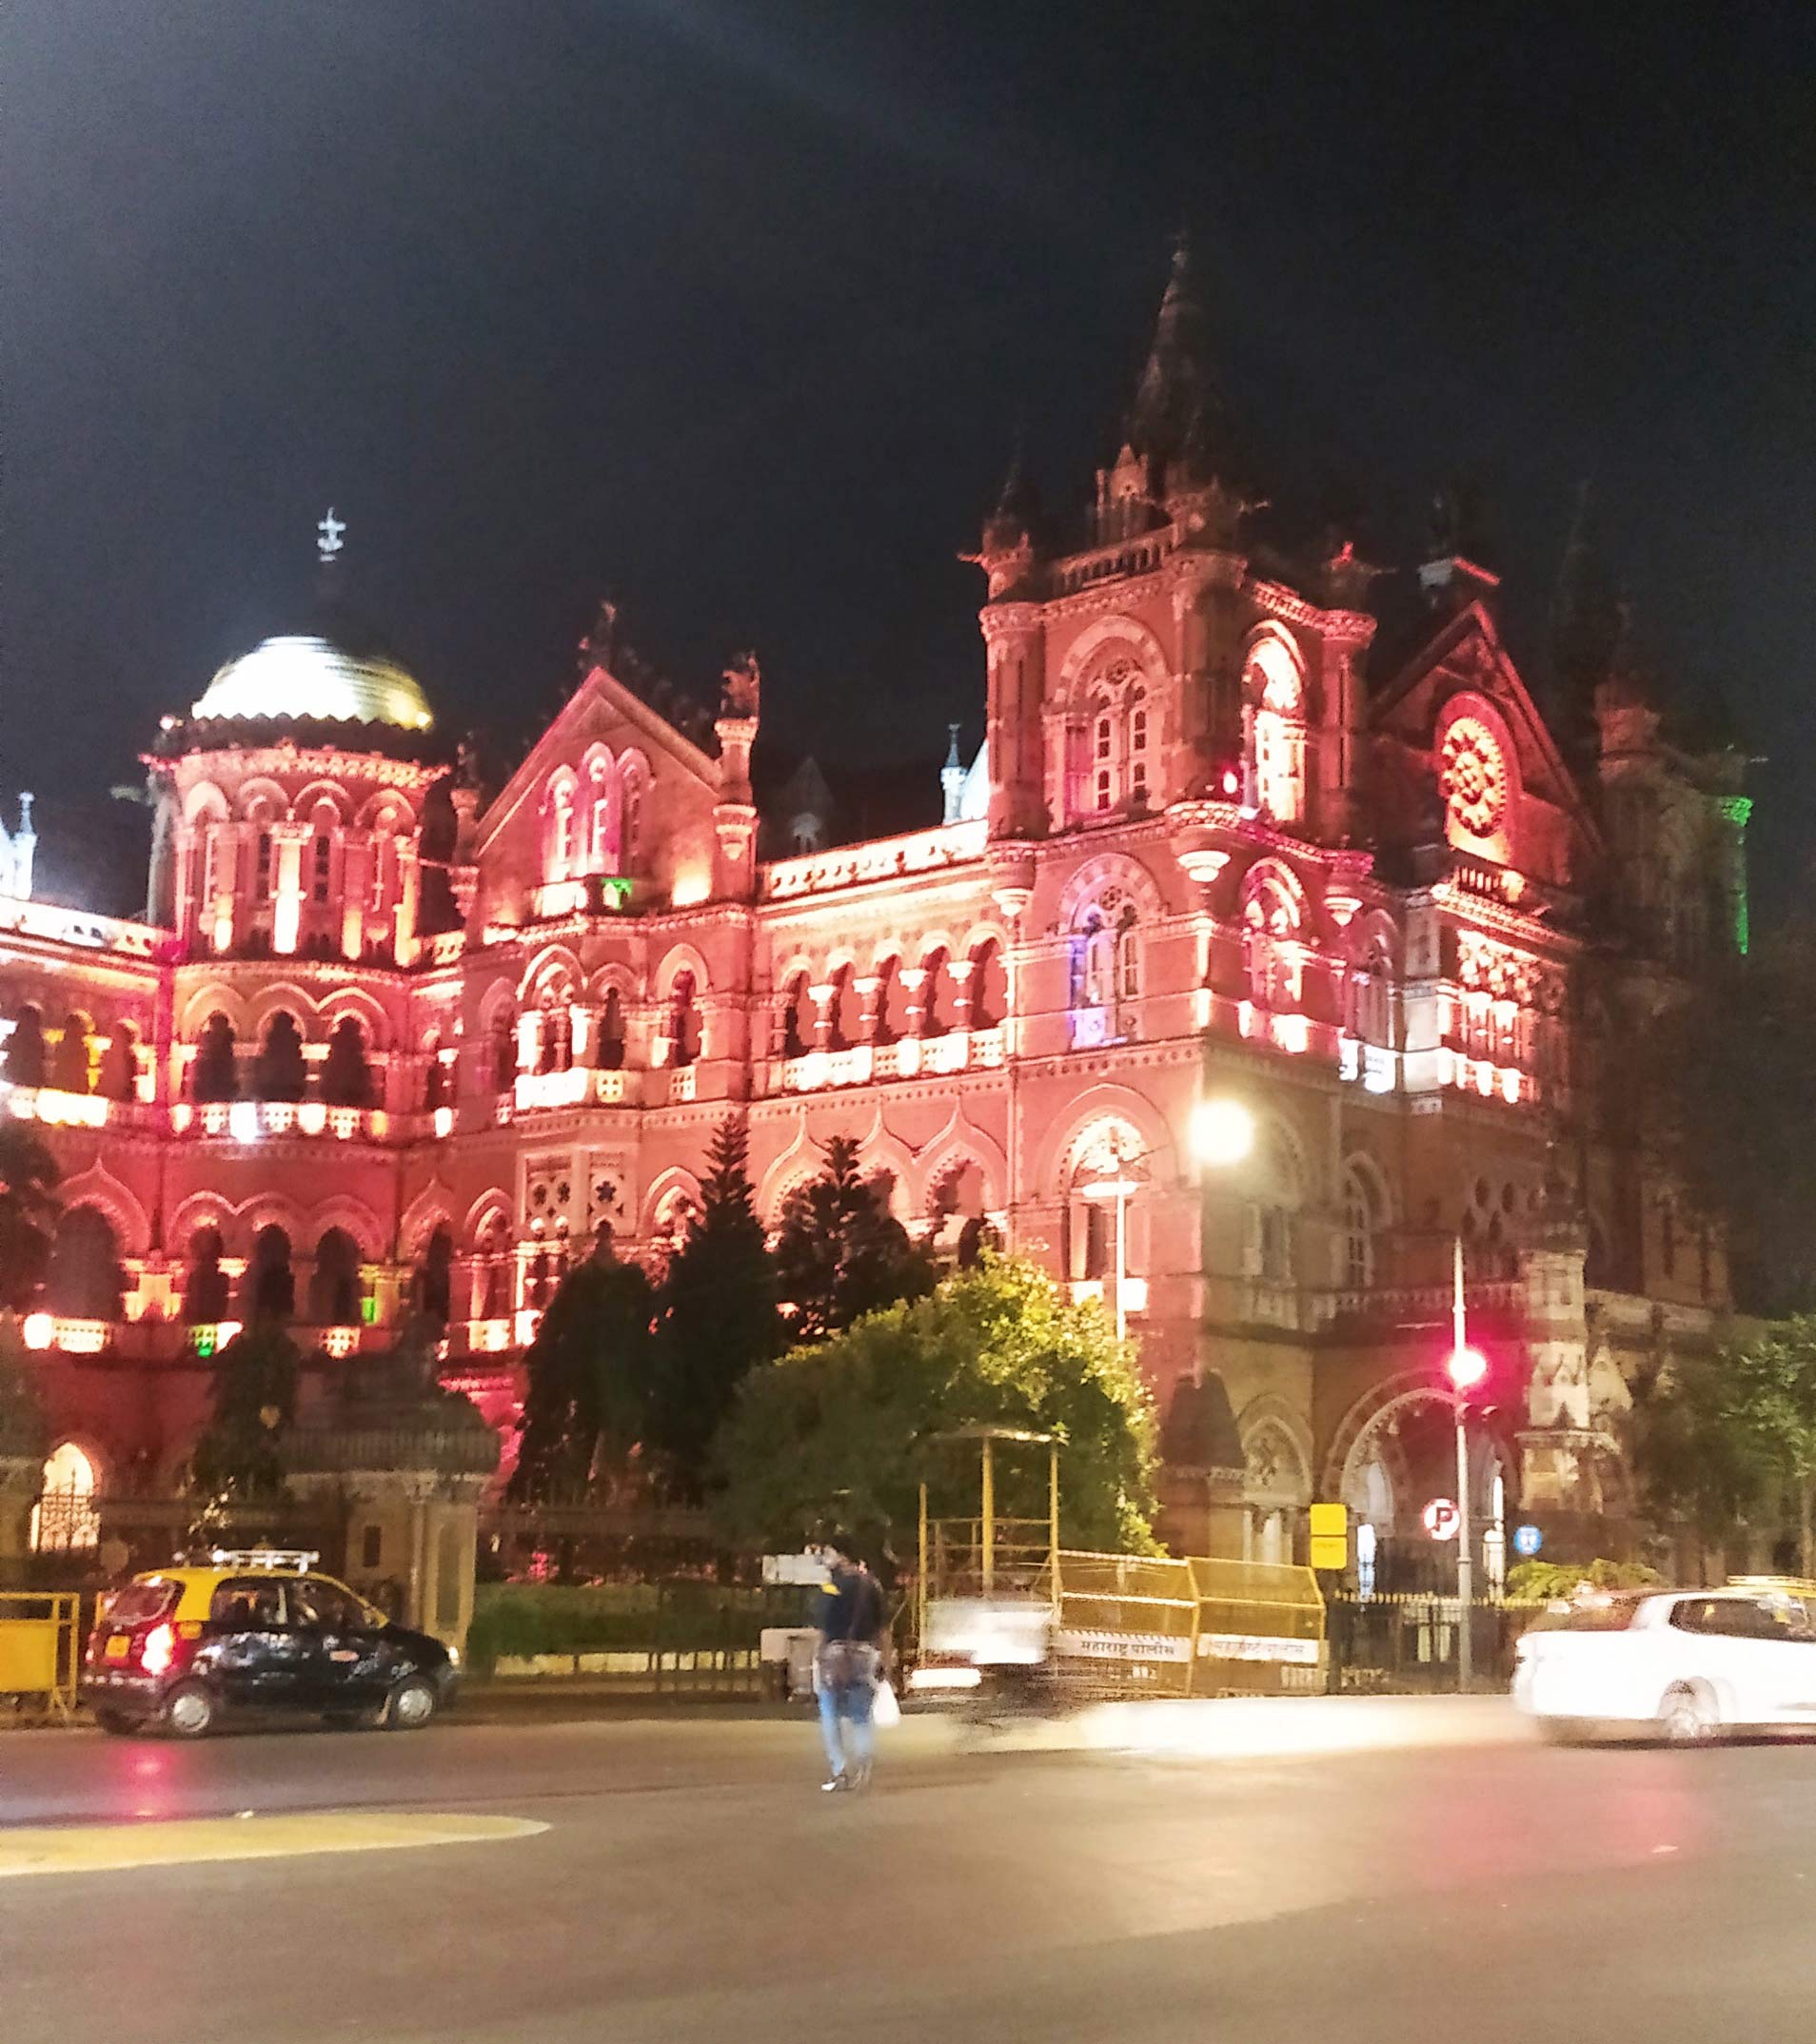 CST Station at night